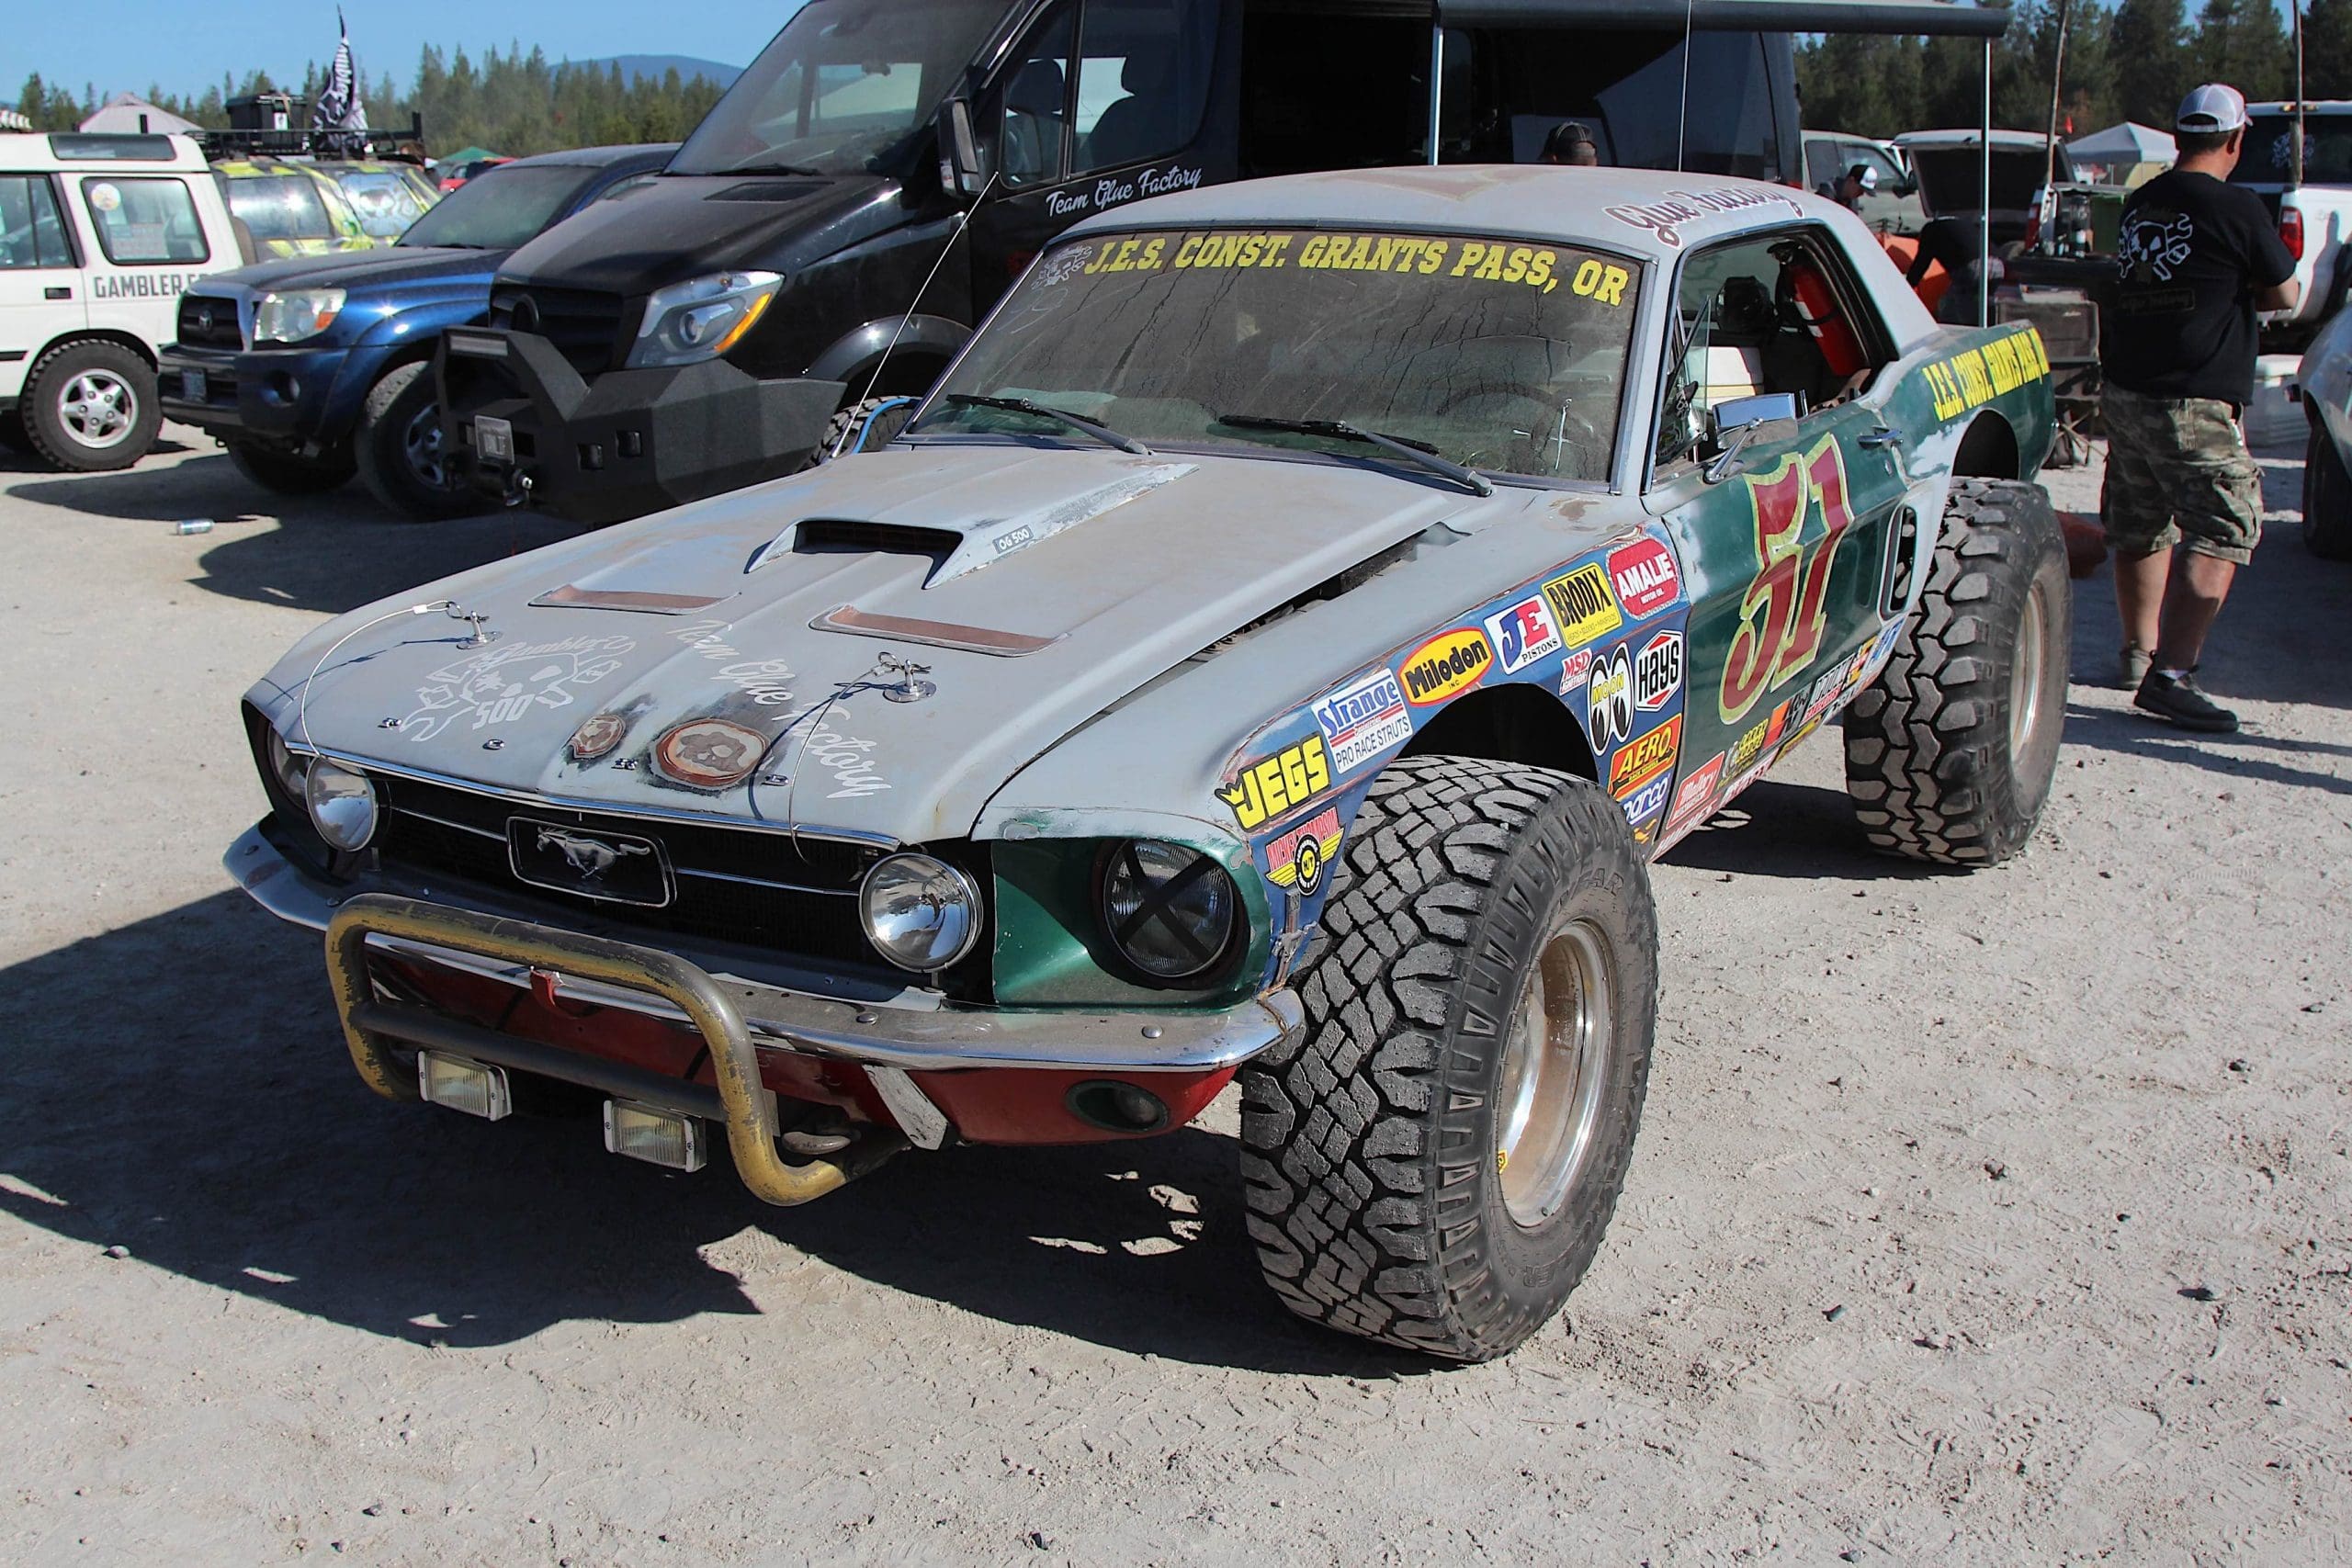 A Mustang For Offroaders!